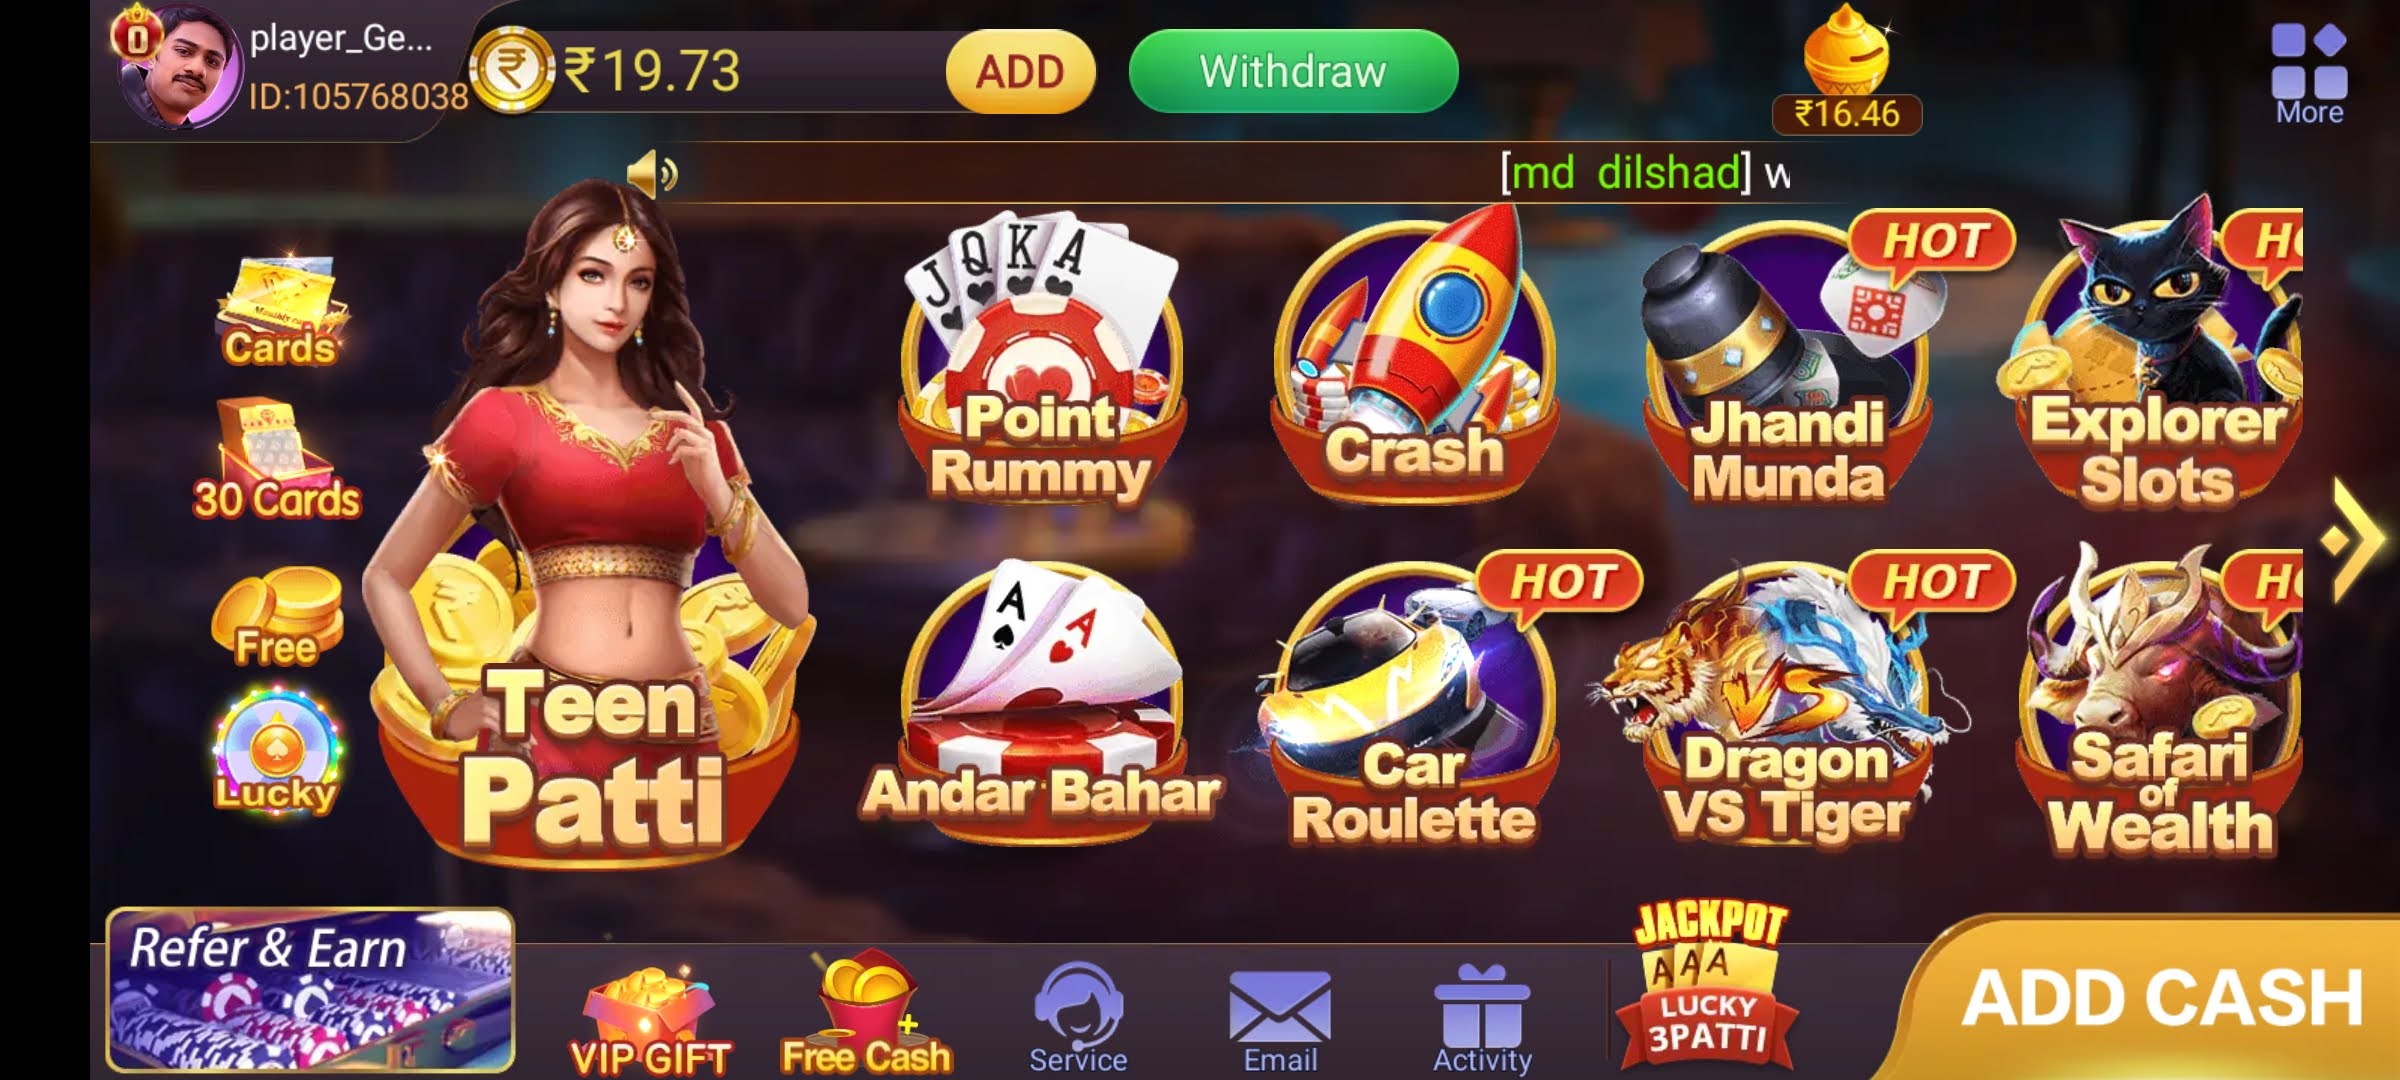 Teen Patti Lotus APK For Android Download | Sign up 50 | Withdraw 1000